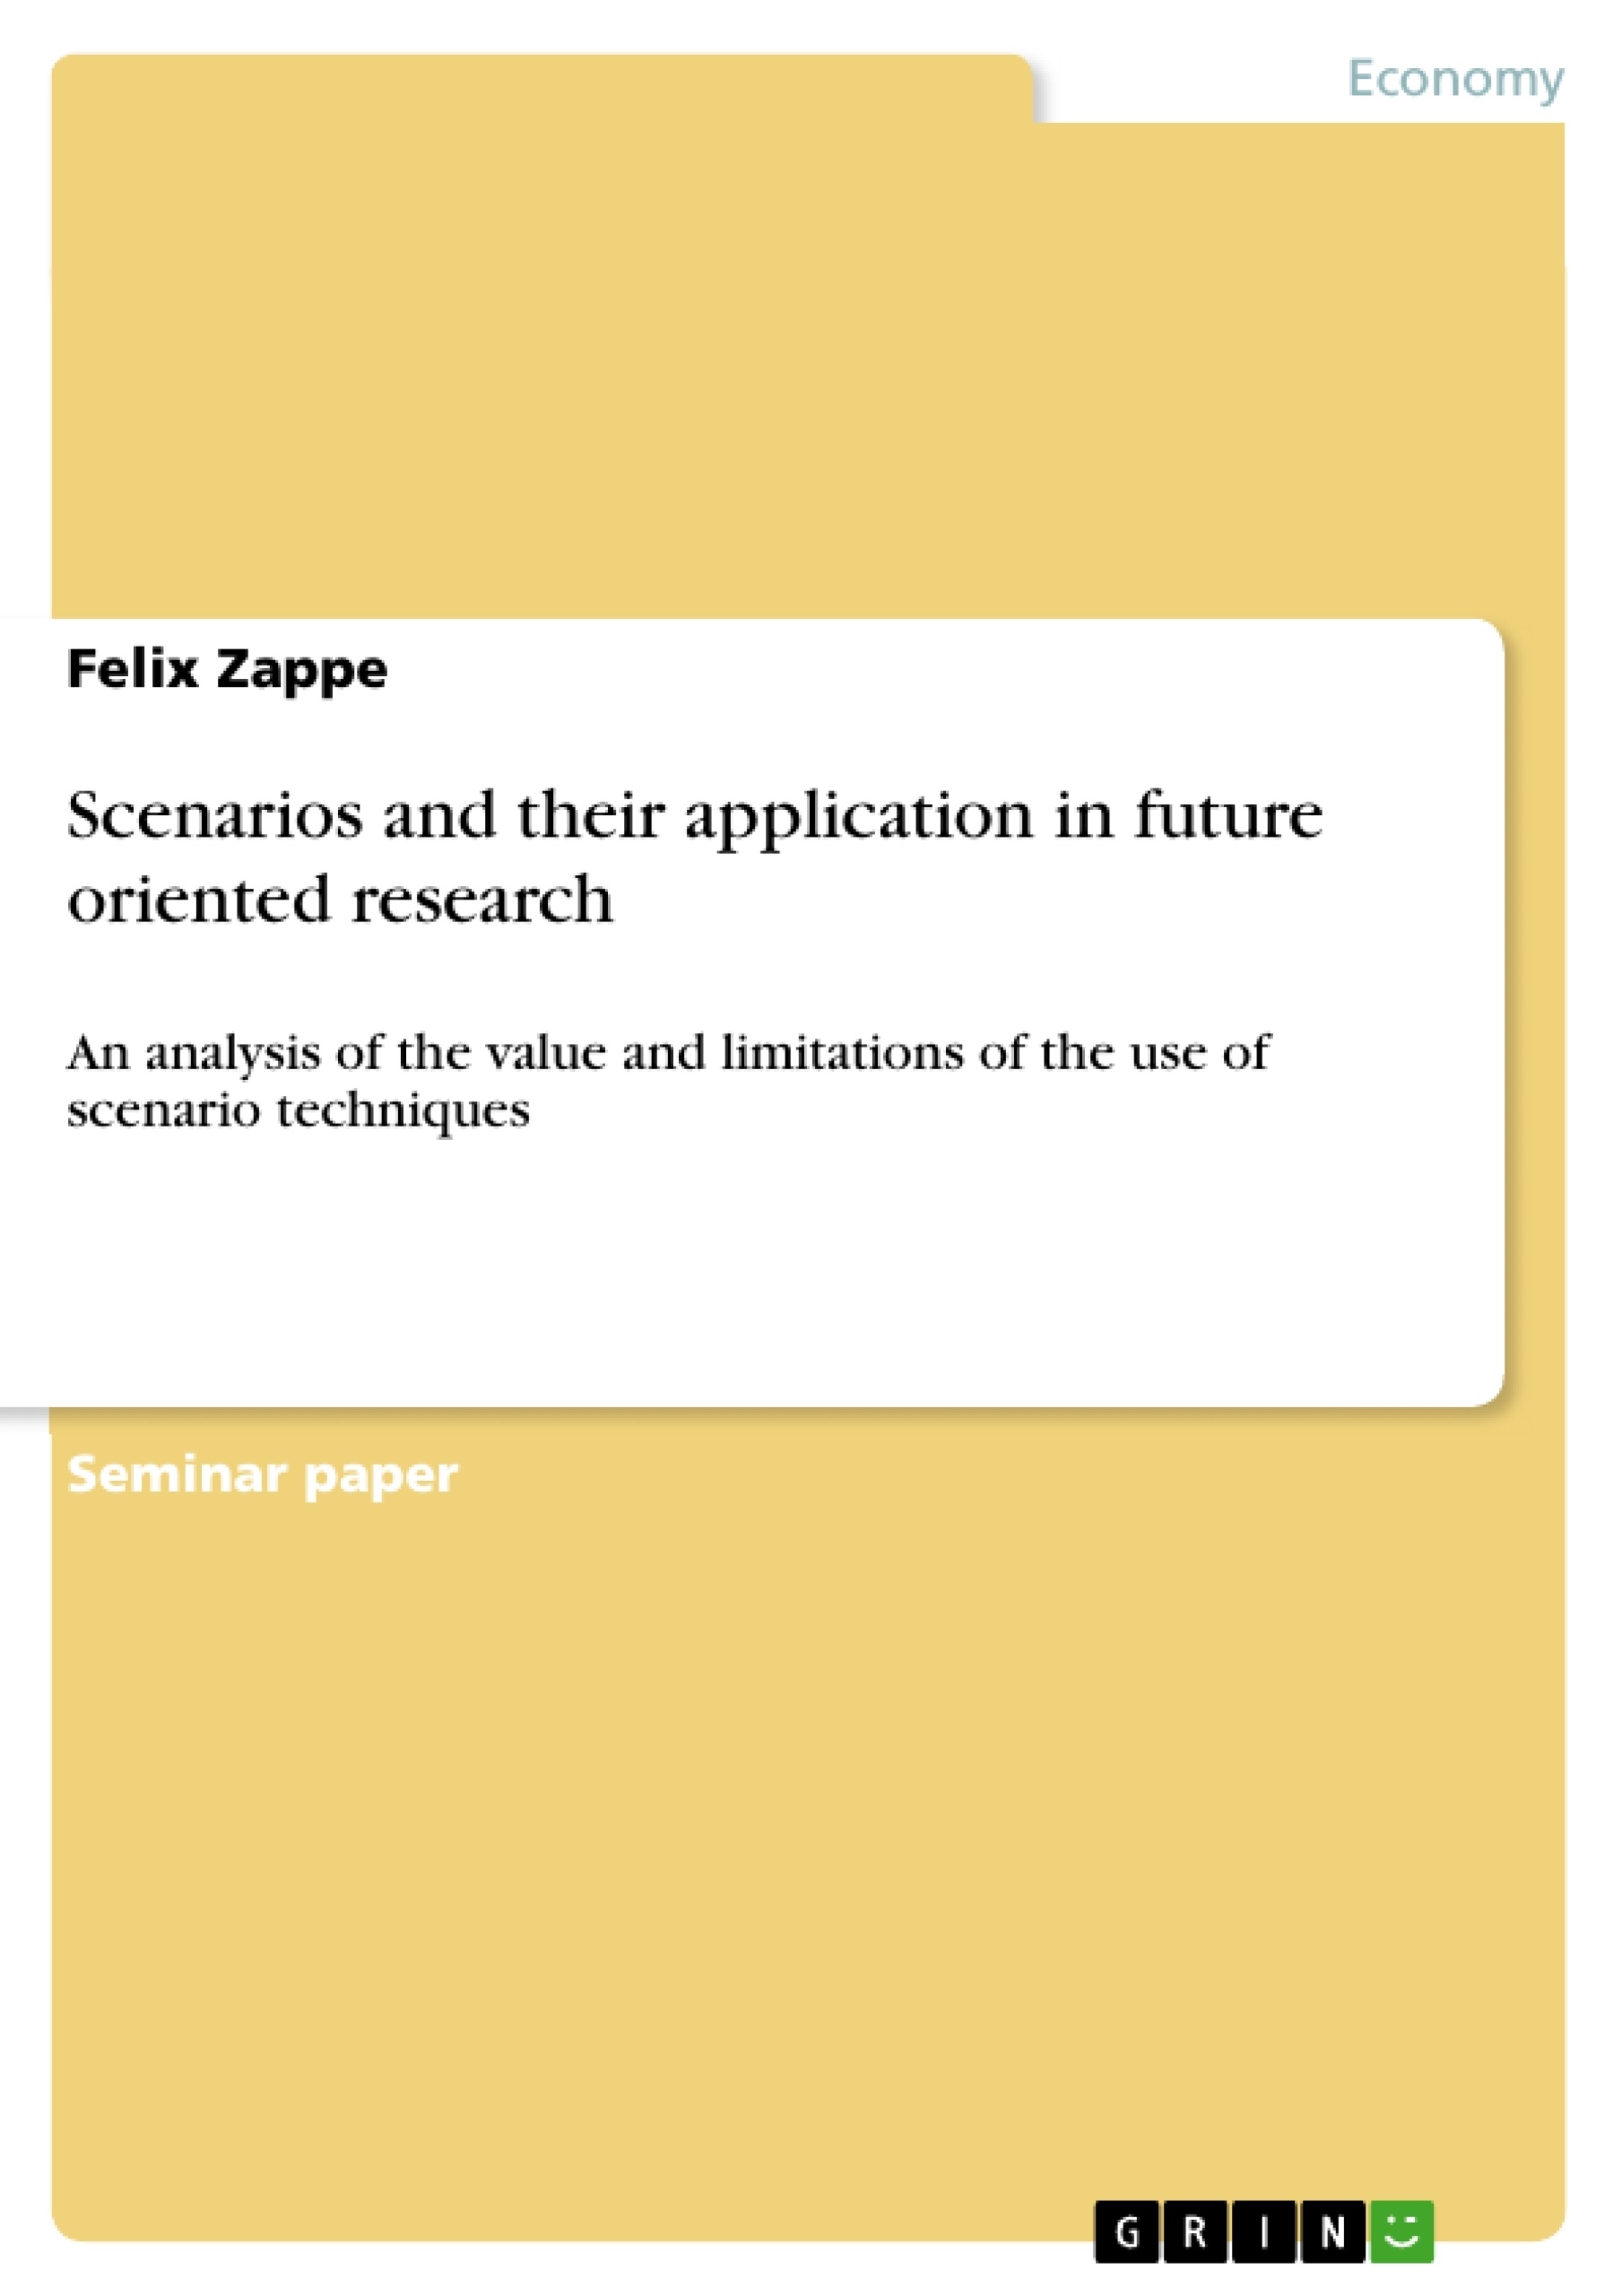 Titre: Scenarios and their application in future oriented research